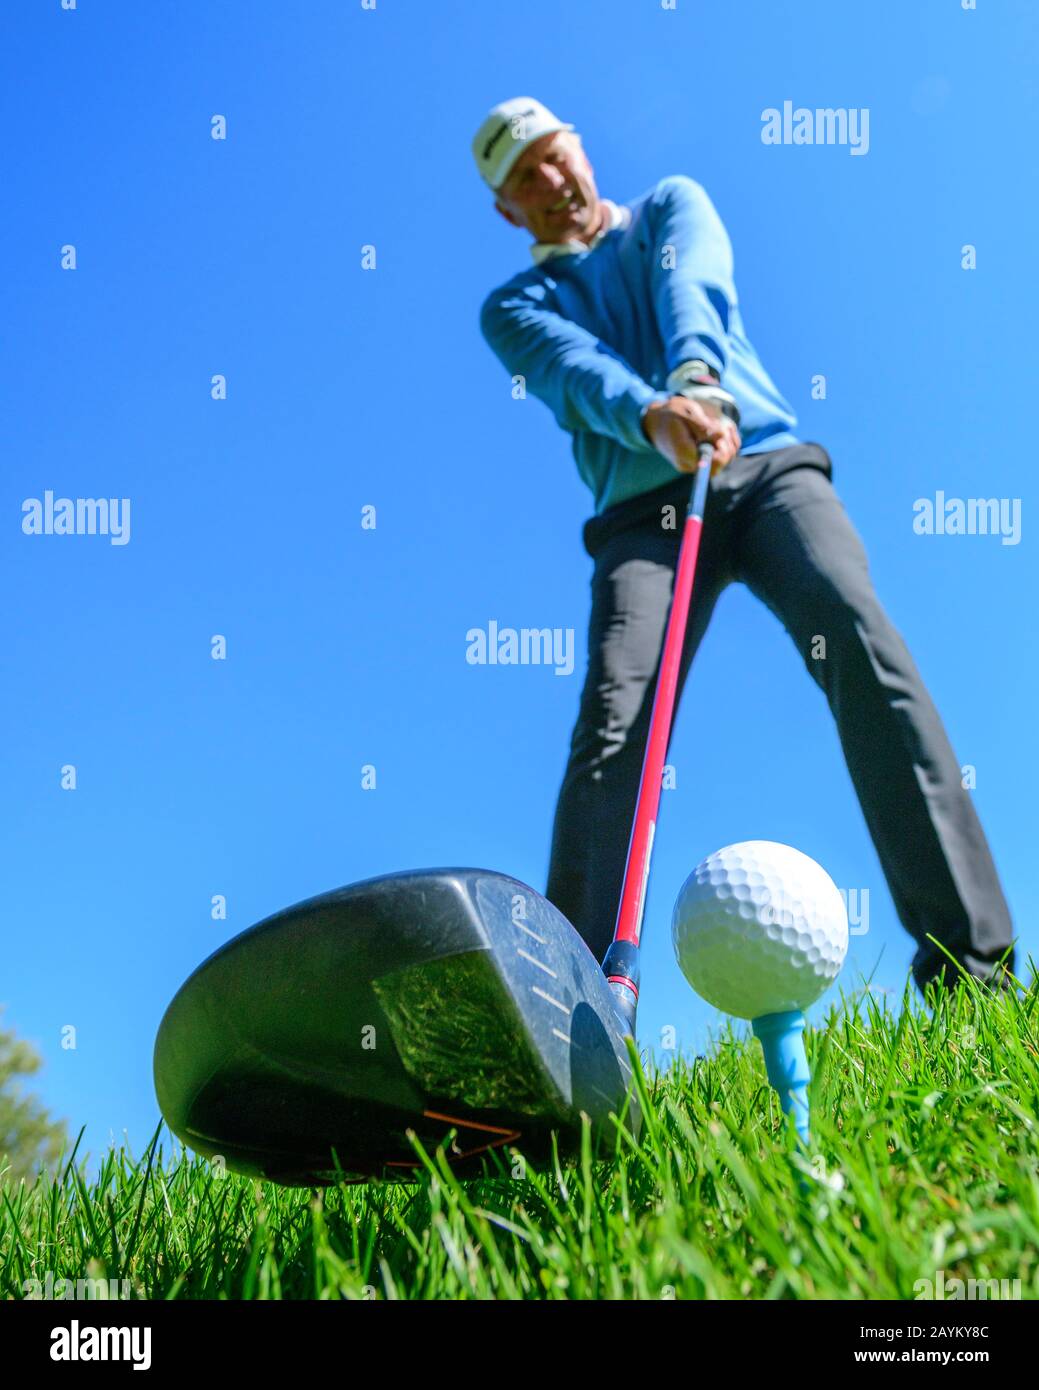 Golf player hitting a ball with driver Stock Photo